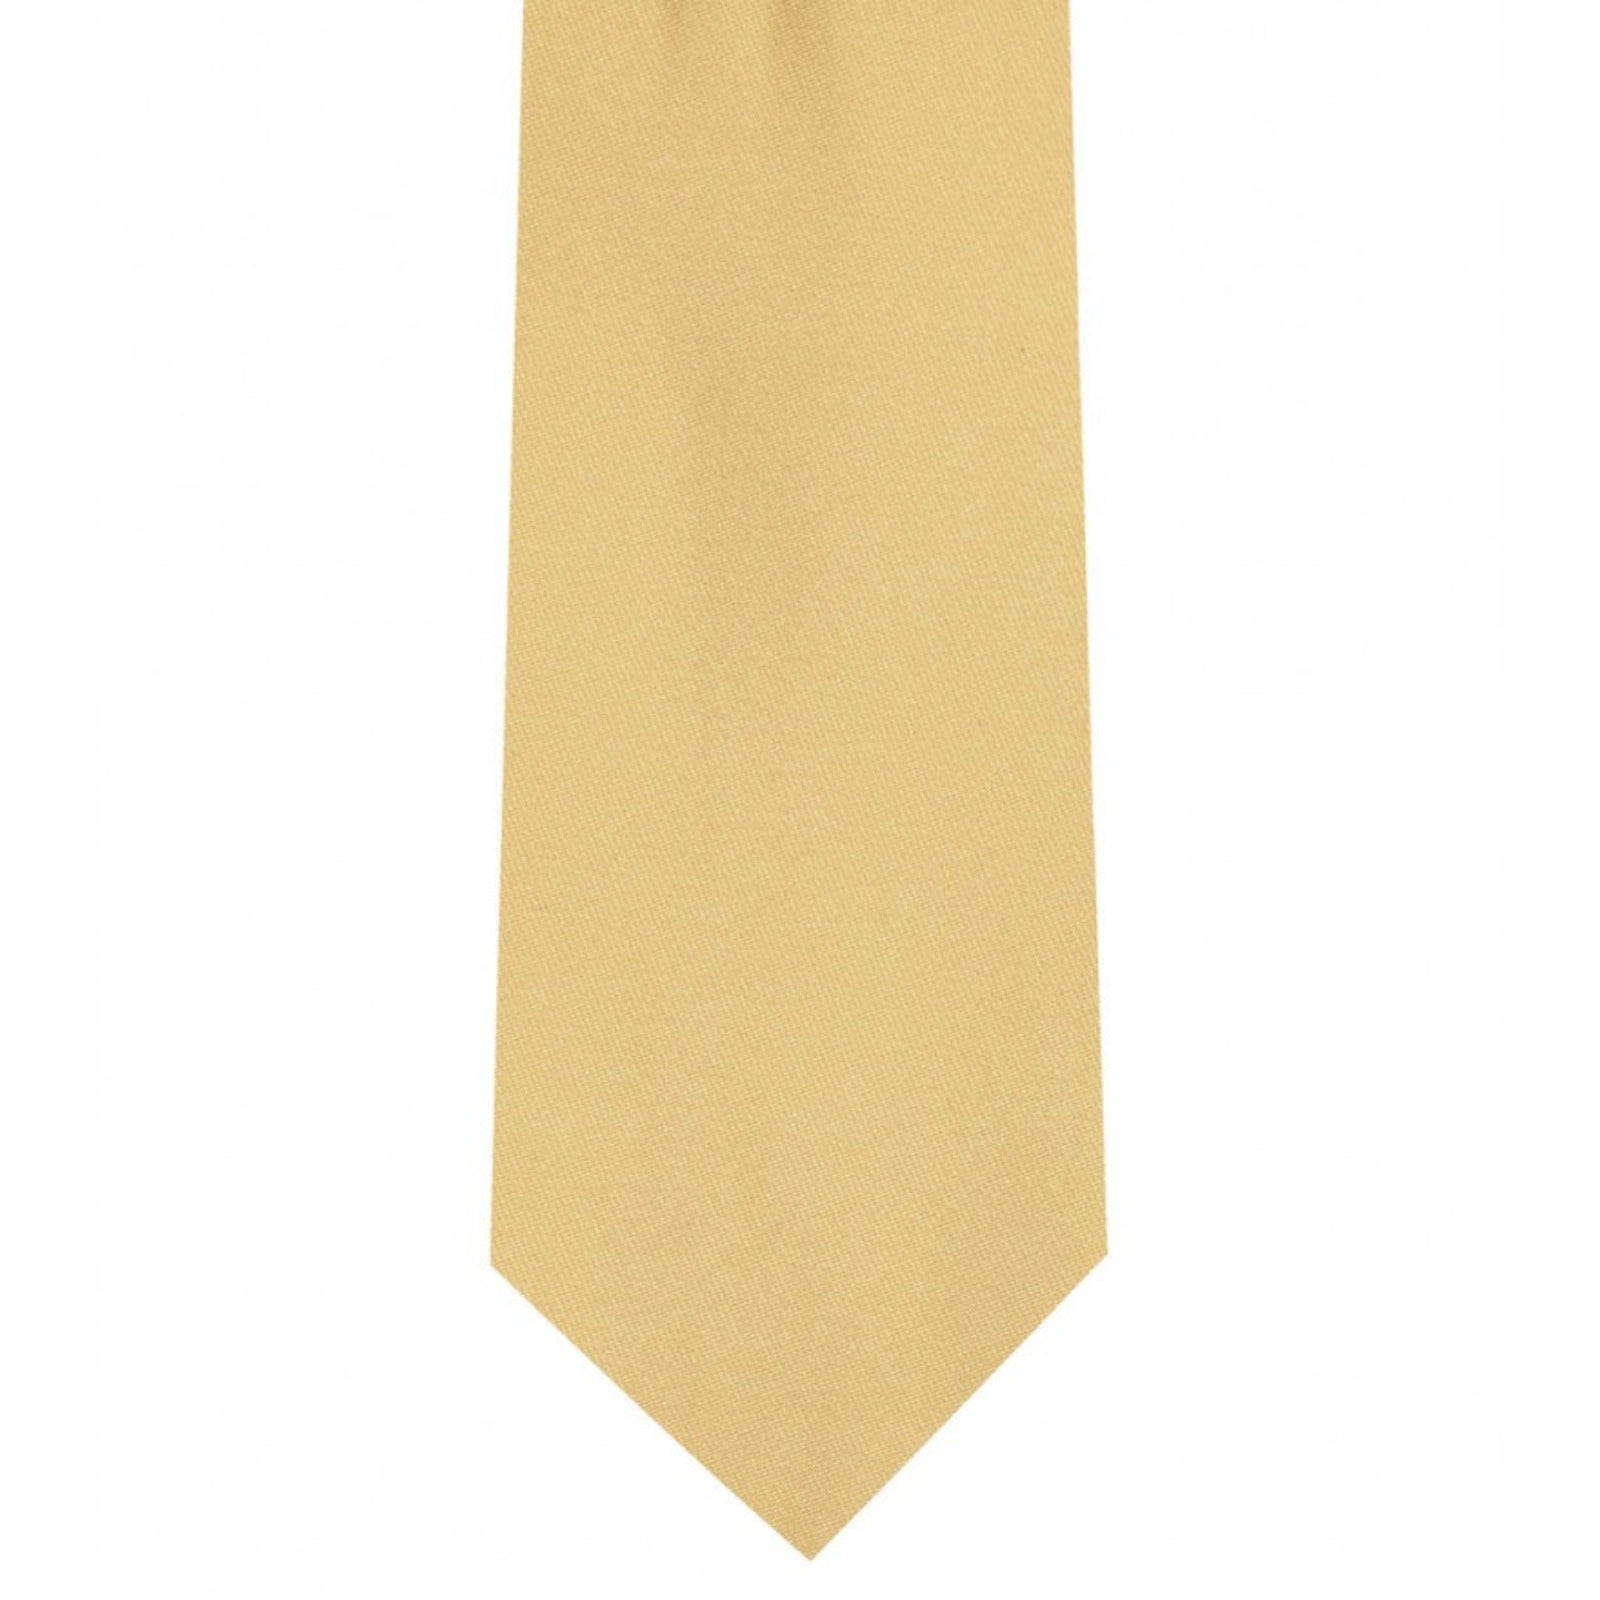 Classic Gold Tie Ultra Skinny tie width 2.25 inches With Matching Pocket Square | KCT Menswear